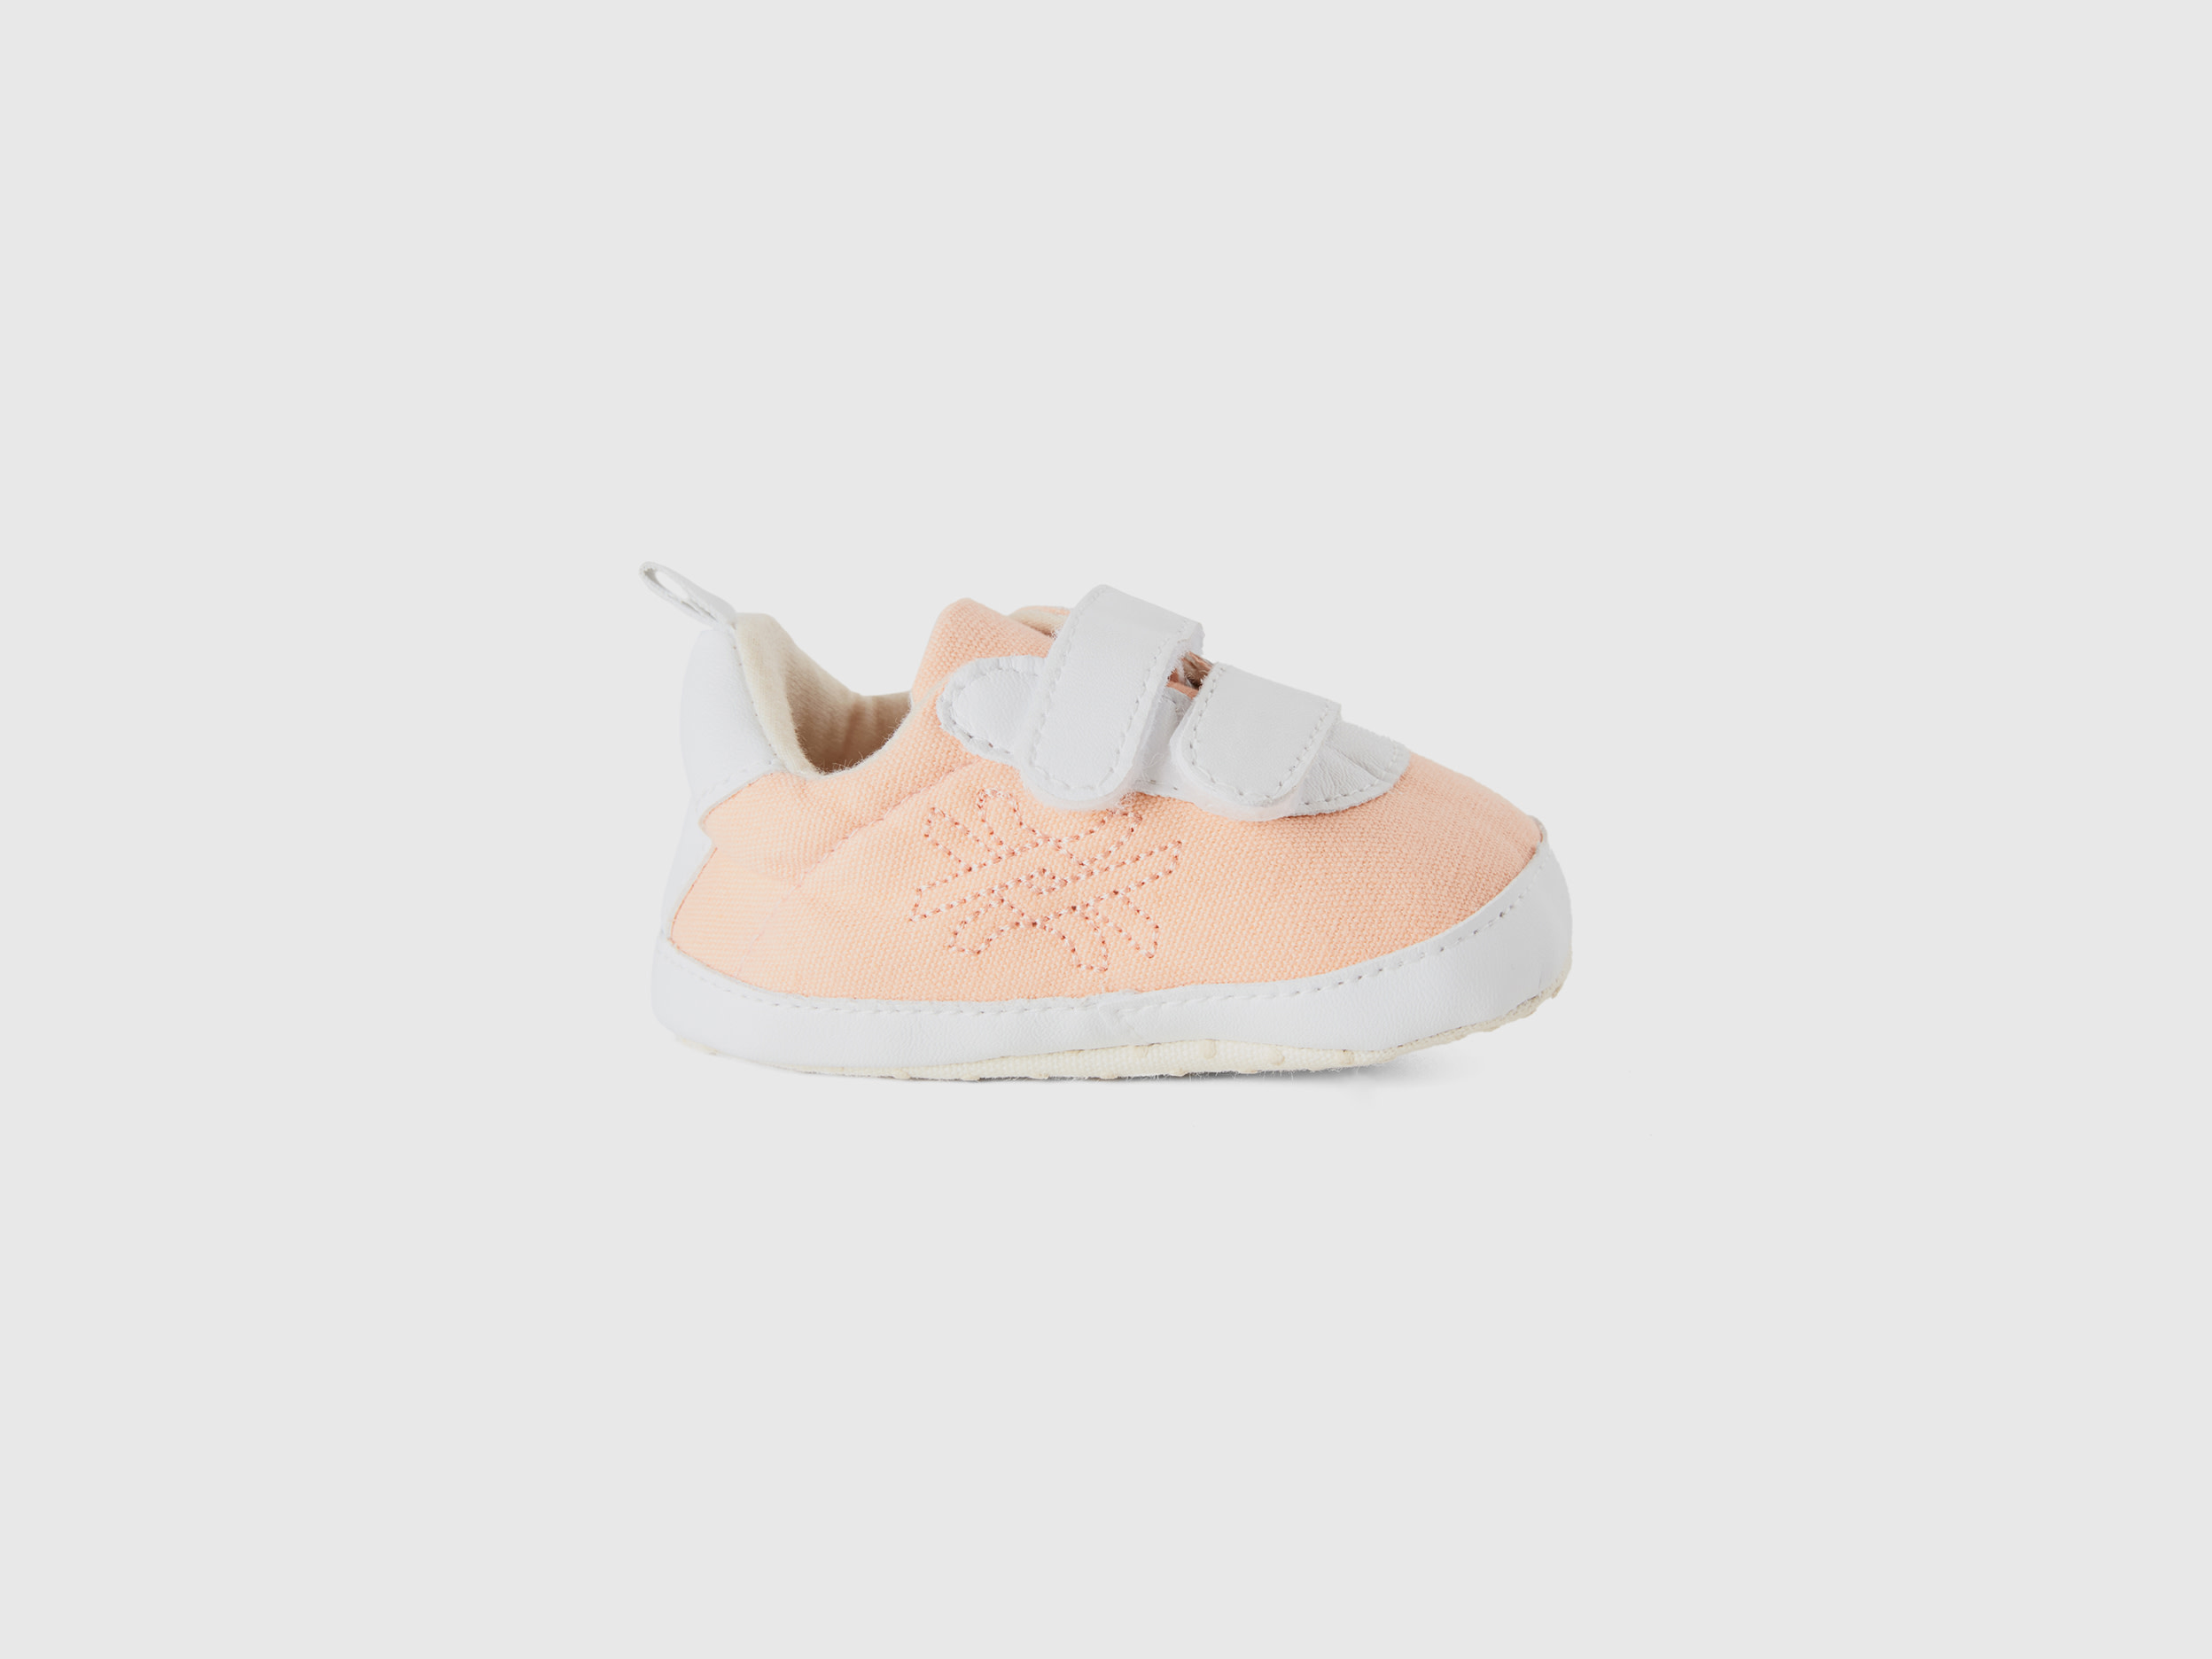 Benetton, First Steps Shoes In Canvas, size 2C, Peach, Kids